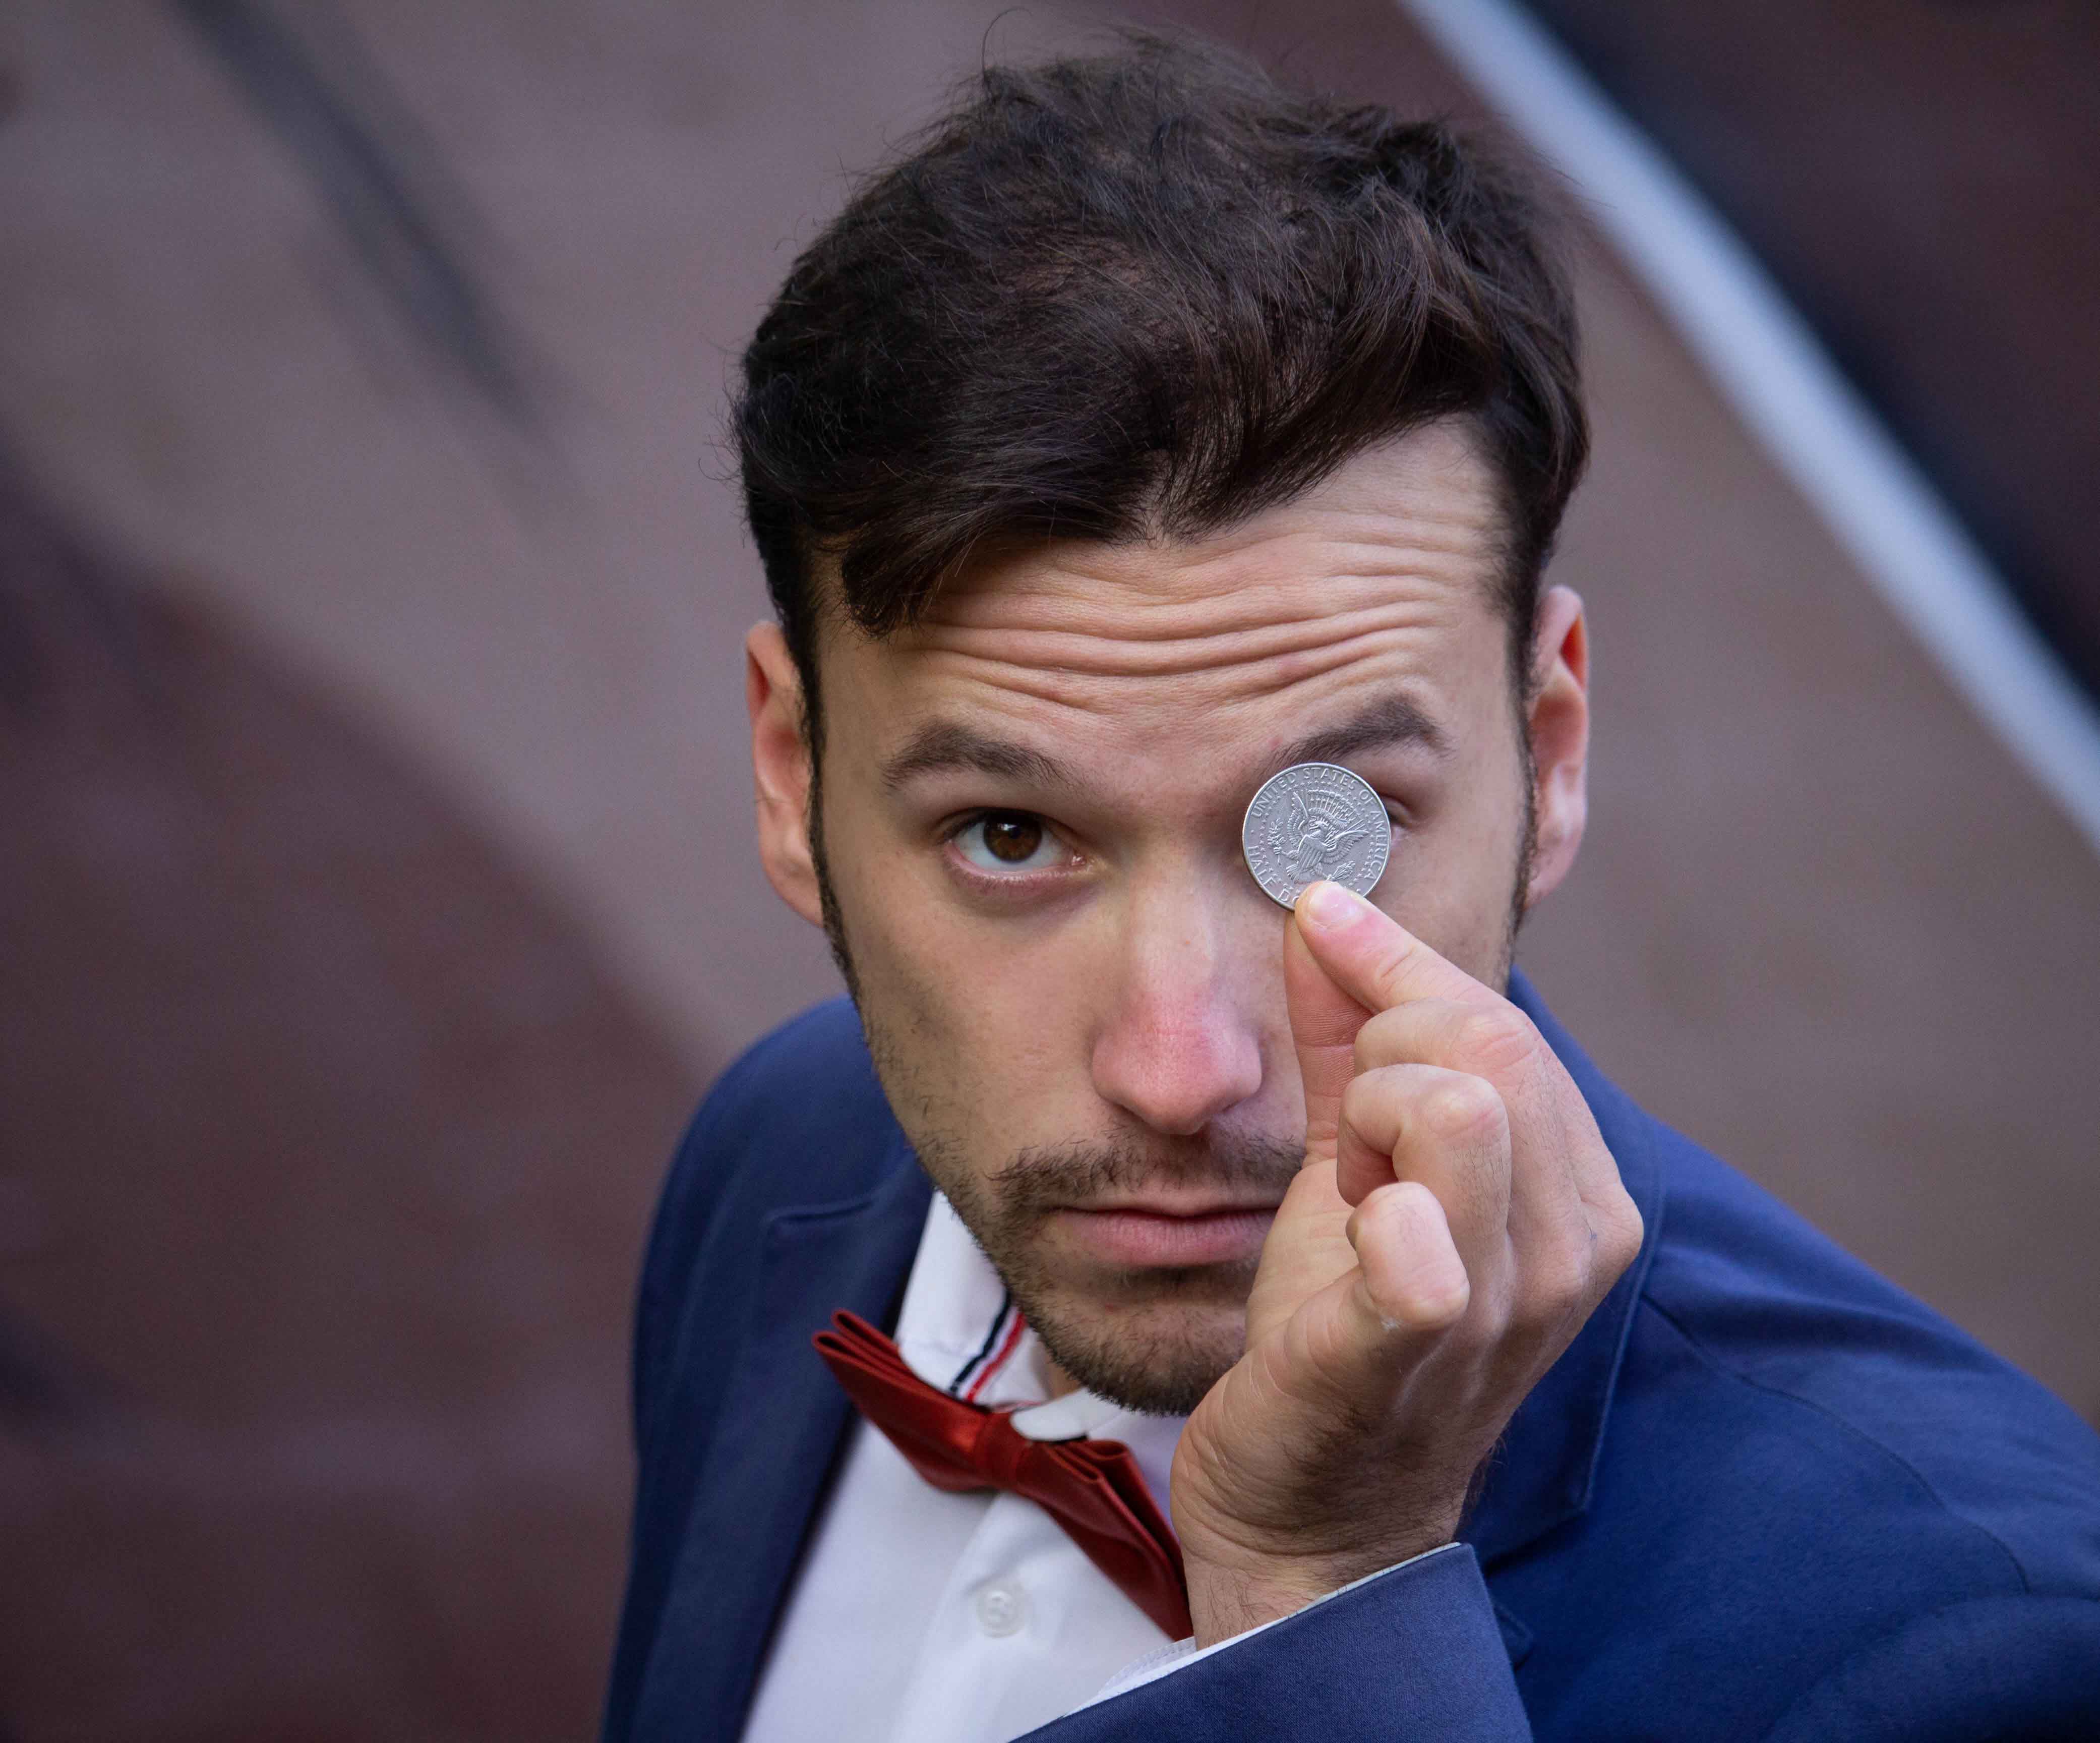 BigBong Photography: Magician in Suit Holding Coin with Intense Focus